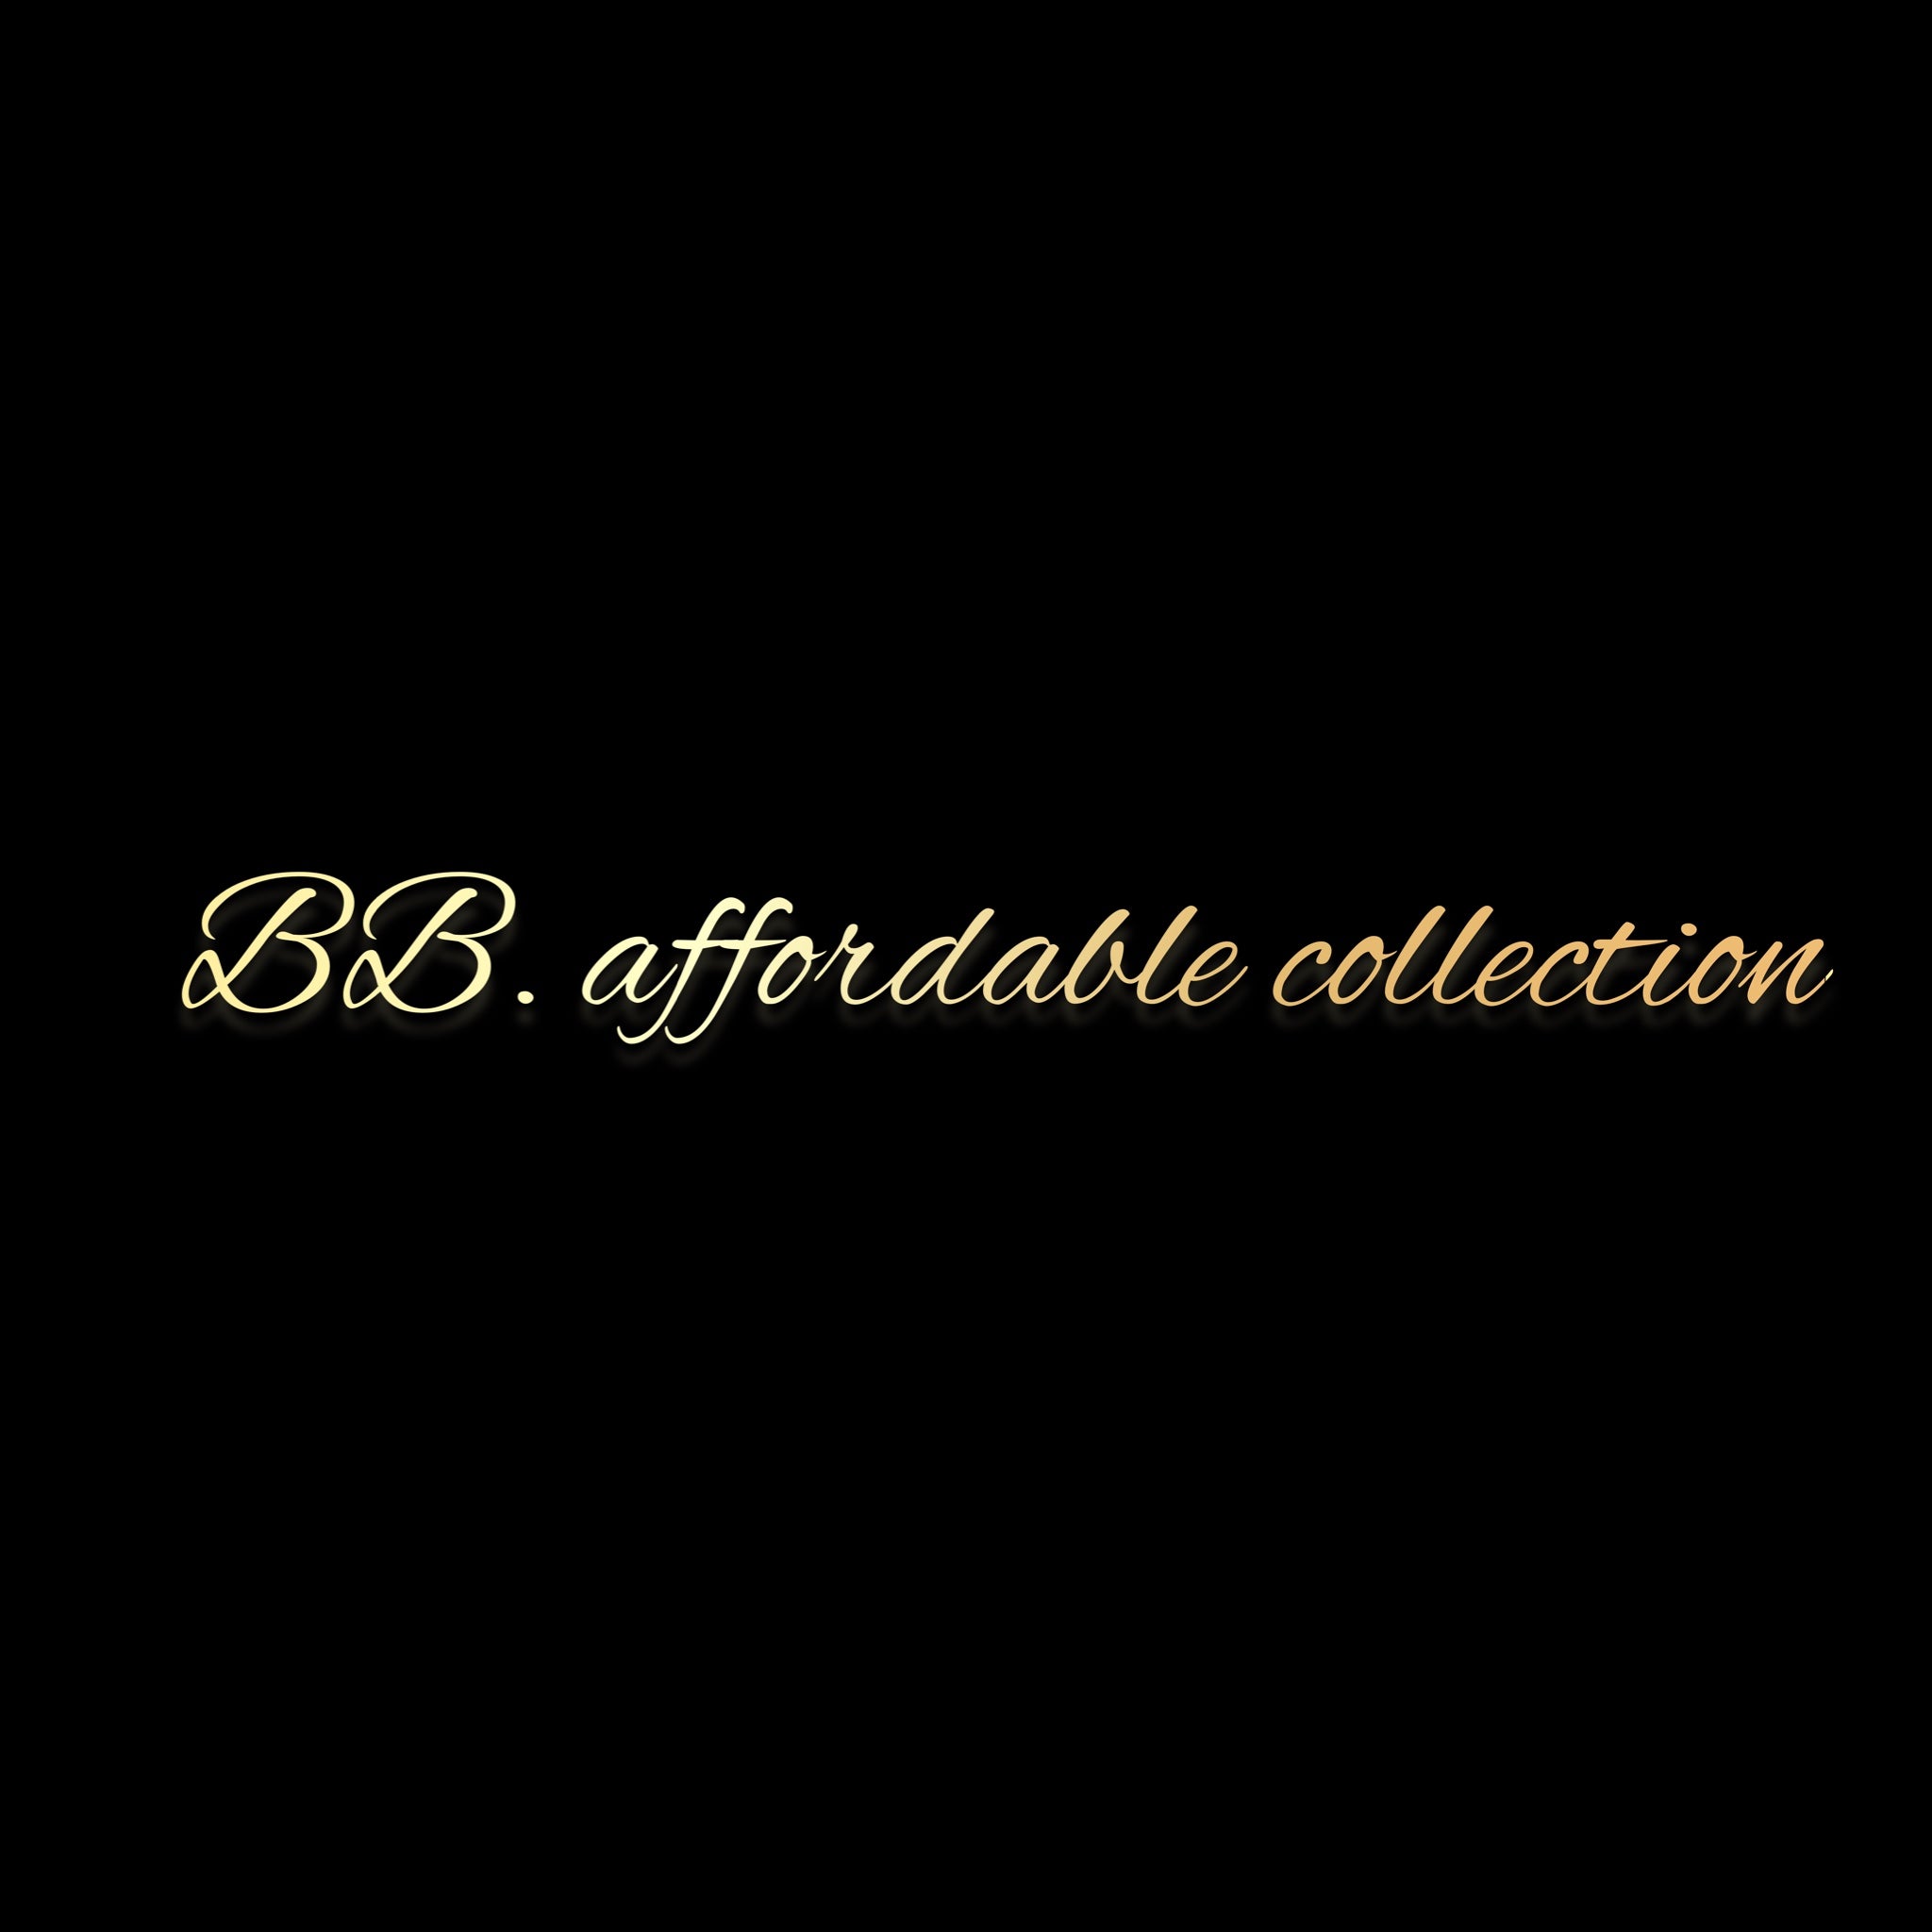 BB. affordable collection